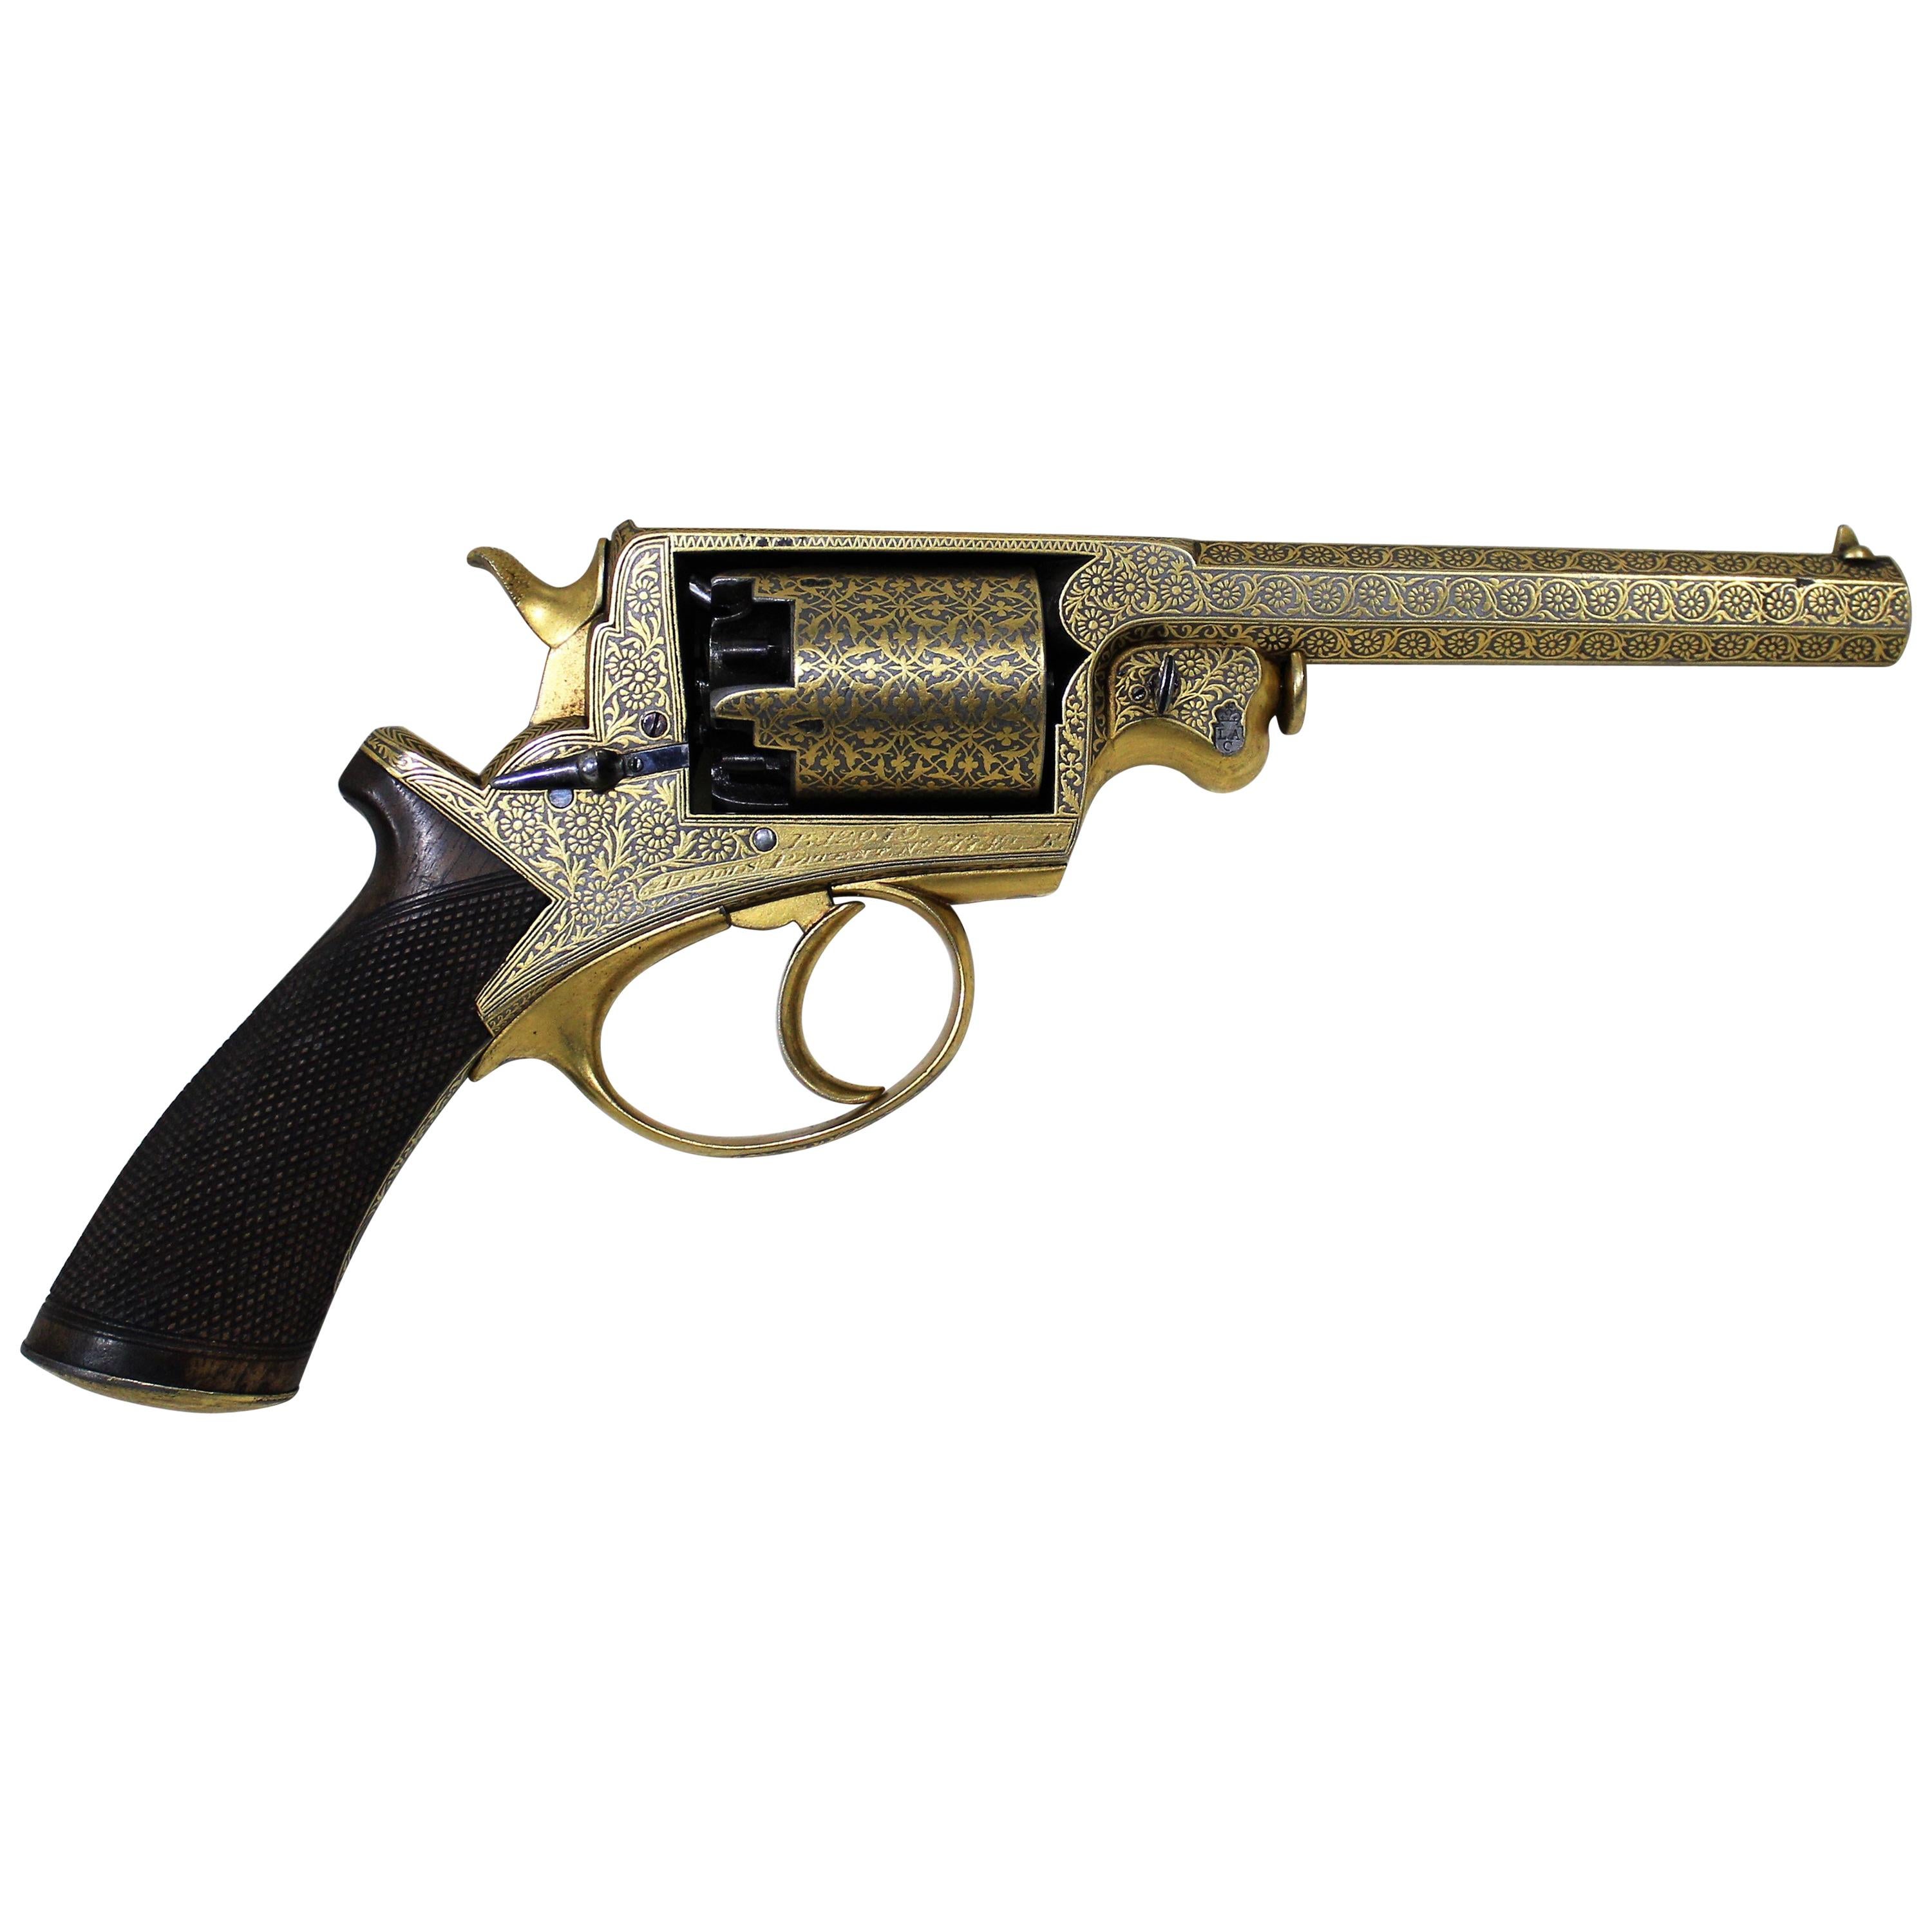 Beaumont-Adams Revolver with Gold Damascene Embellishment and Original Case